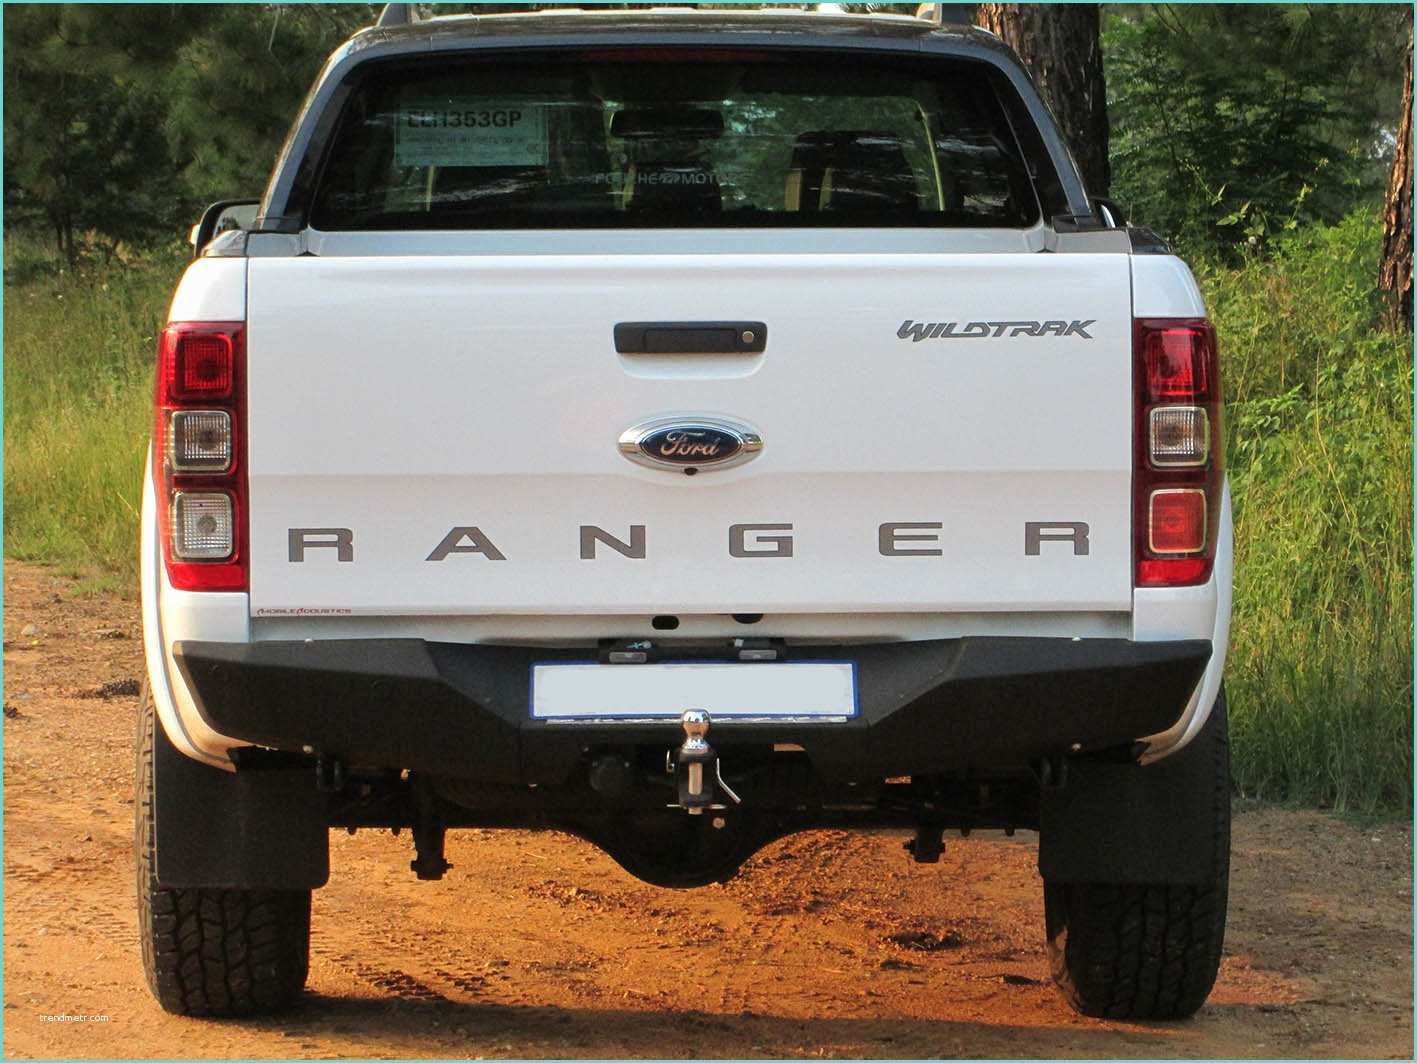 Ford Ranger Trailer Hitch ford Ranger tow Hitch